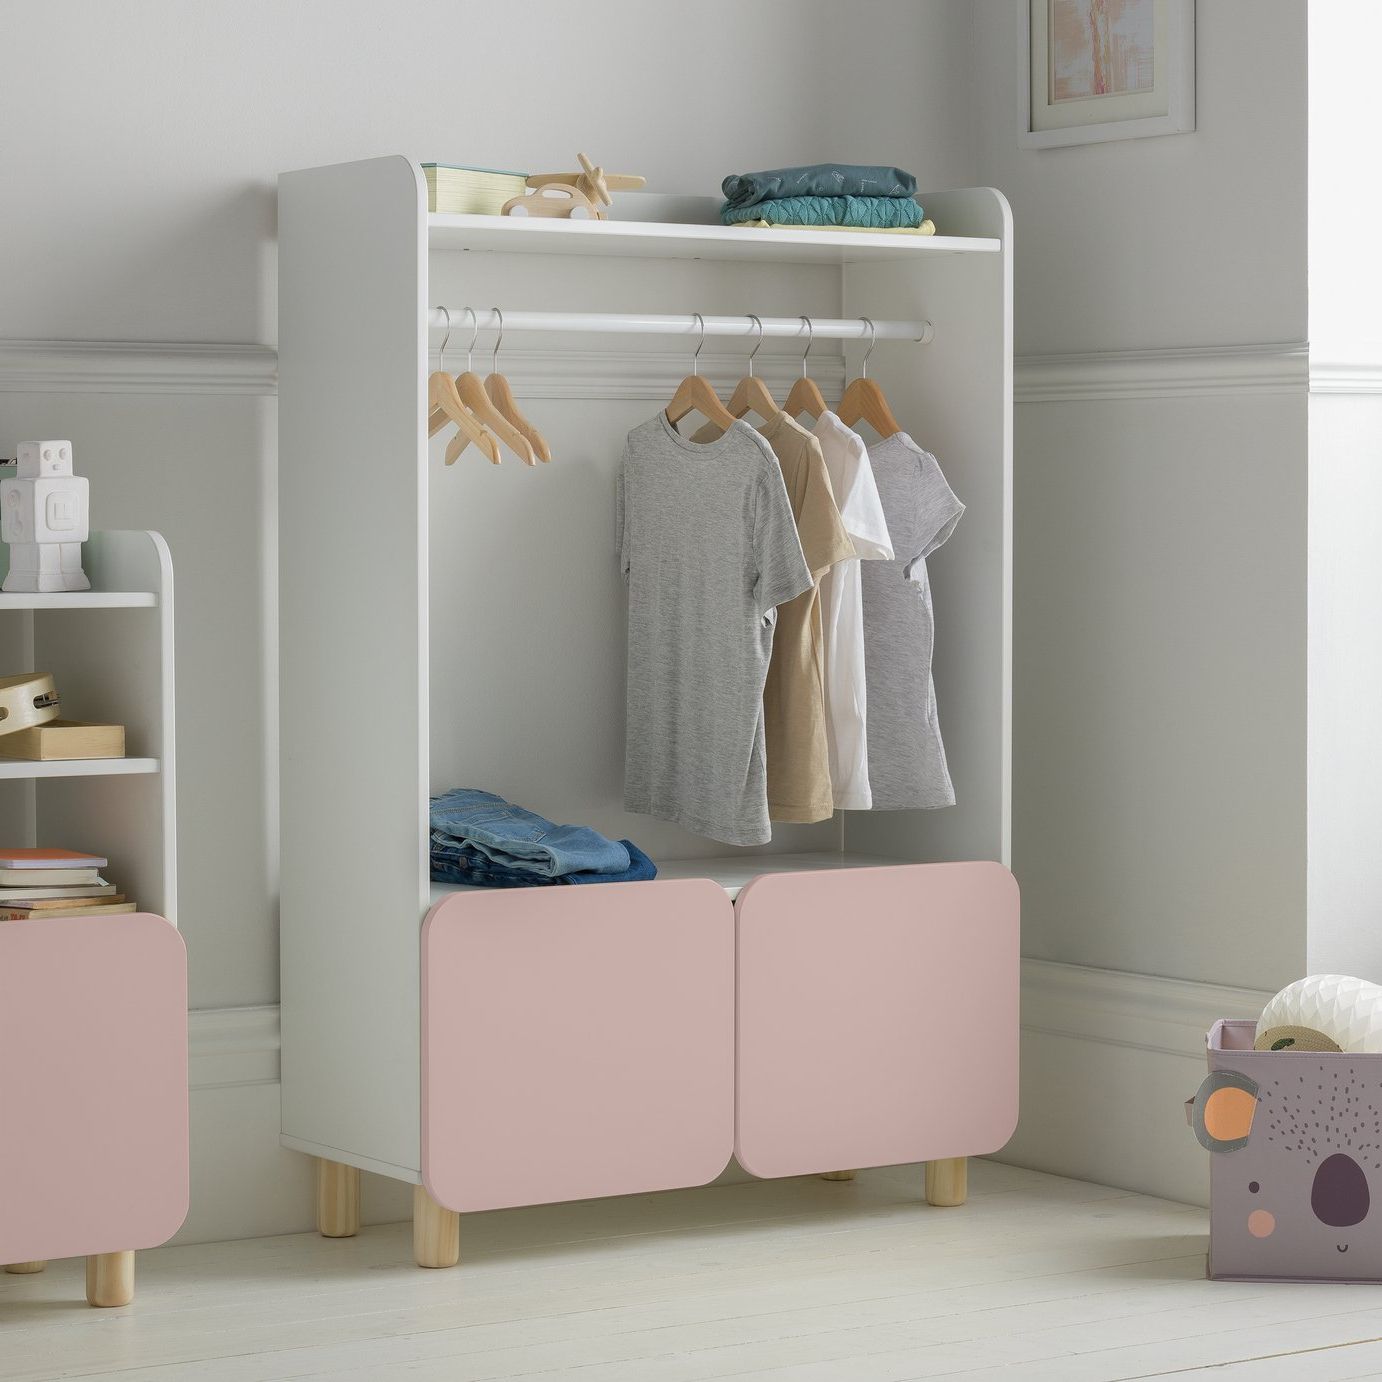 Argos Home Milo Dressing Rail – Pink | Compare Furnishings For Argos Double Rail Wardrobes (View 7 of 20)